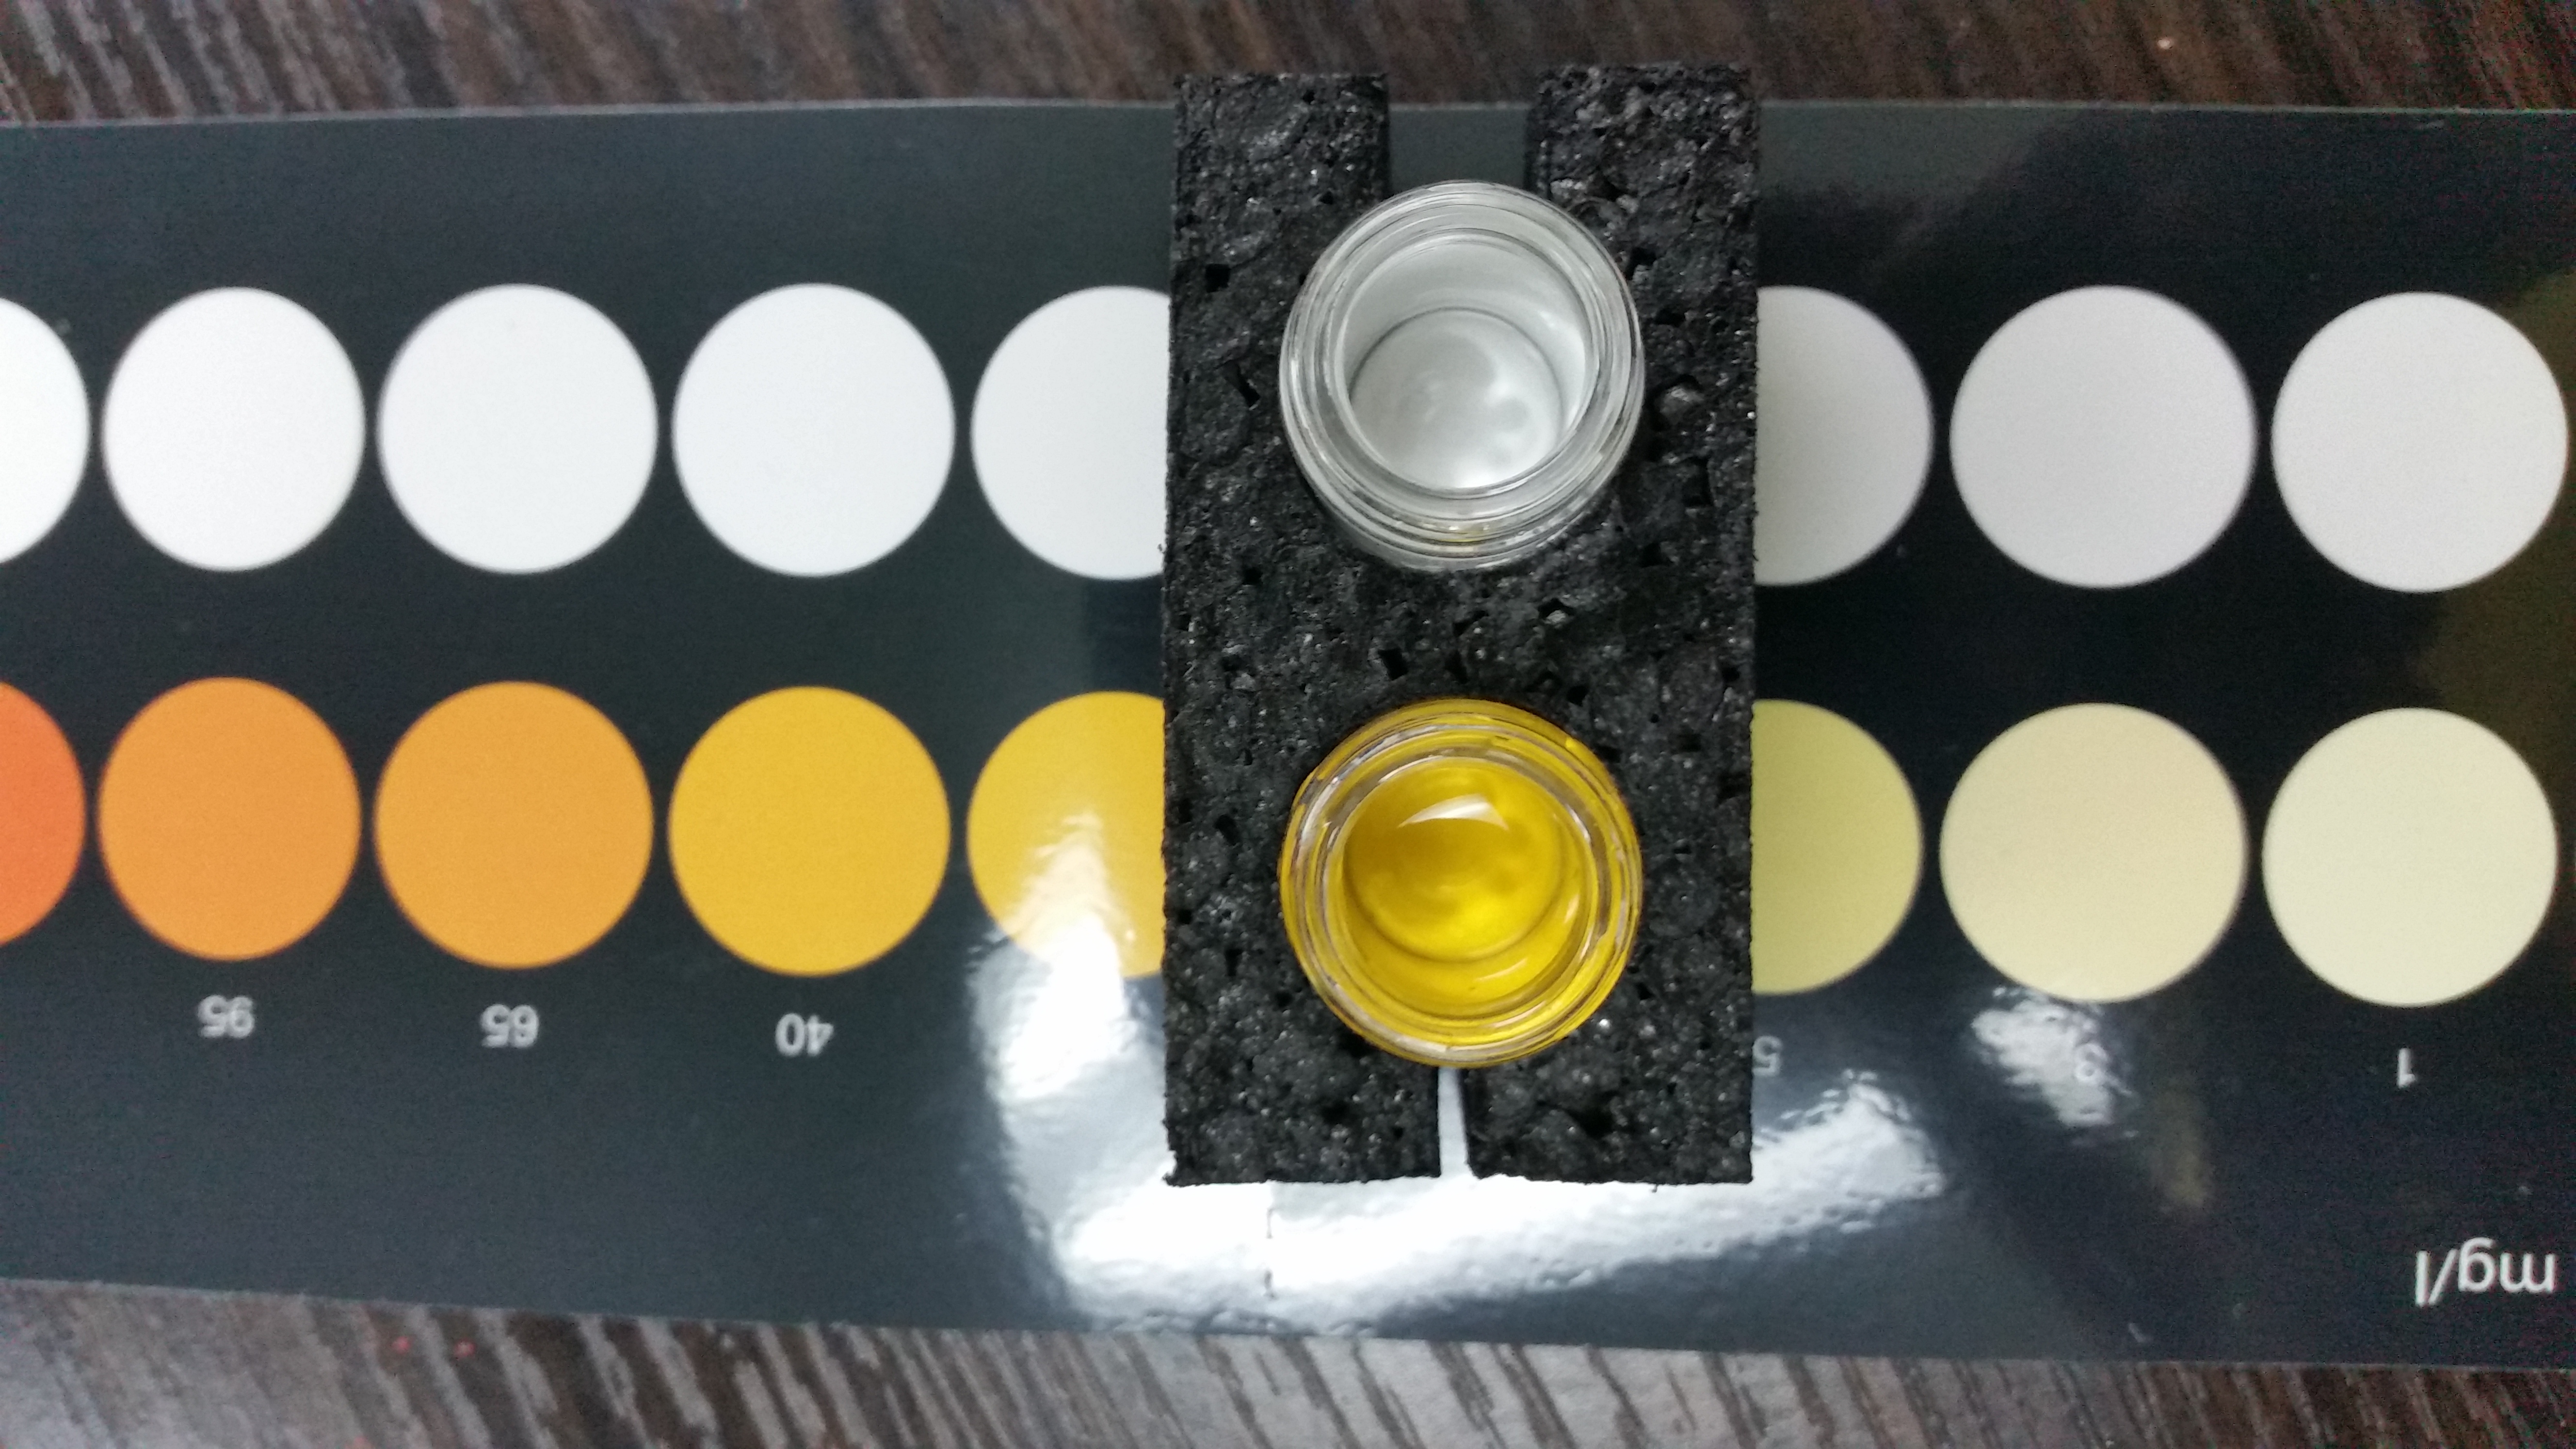 Nyos Nitrate test kit has easily read scale and takes only two steps, Reef  Builders